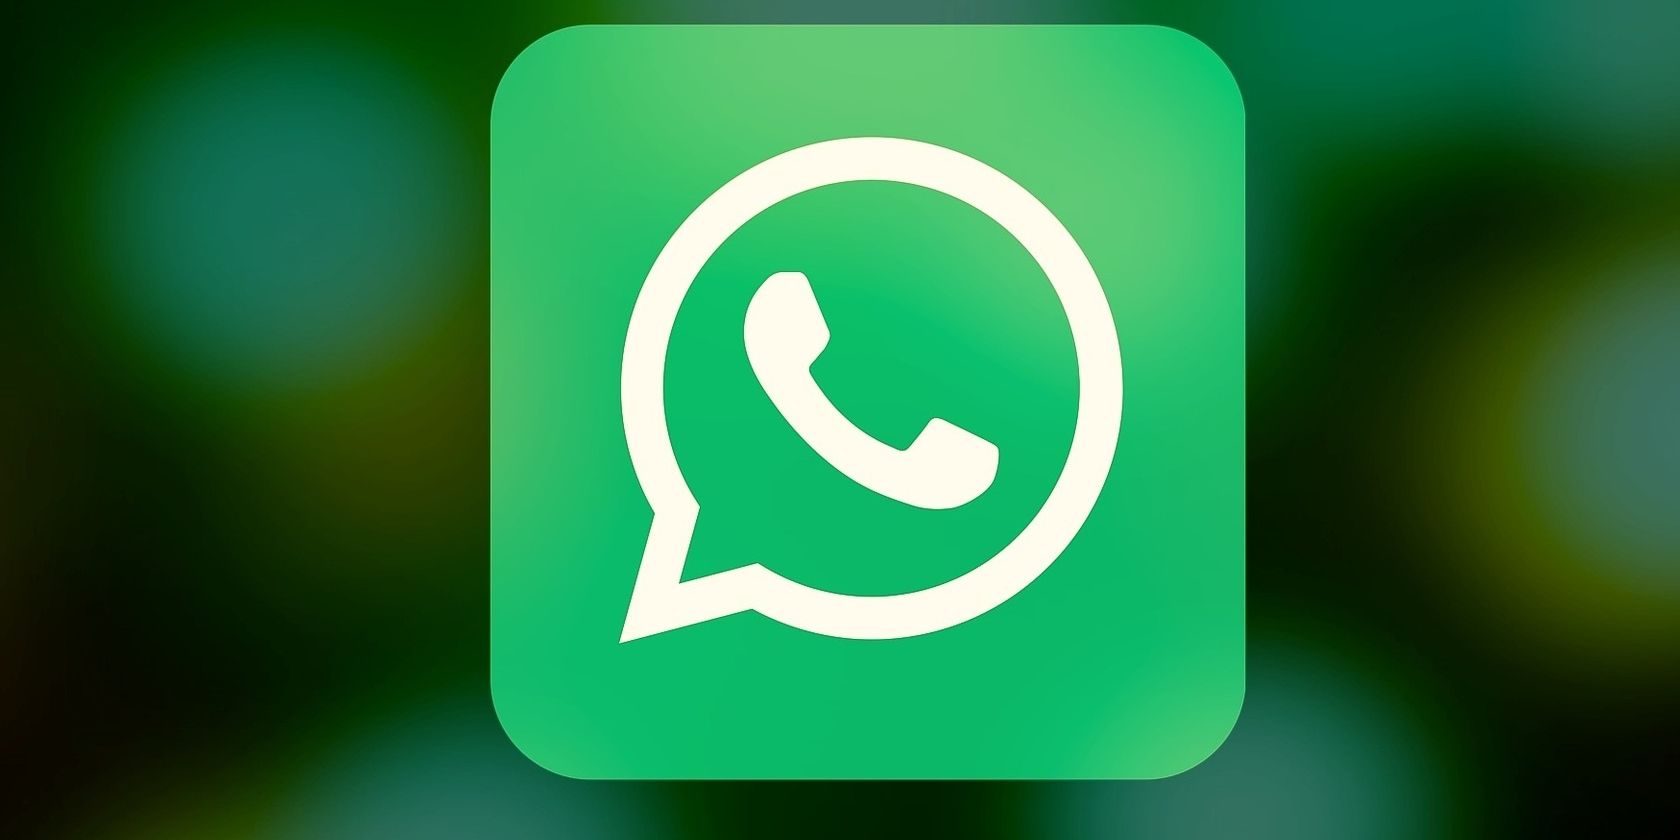 How to Protect Yourself After Massive WhatsApp Data Breach